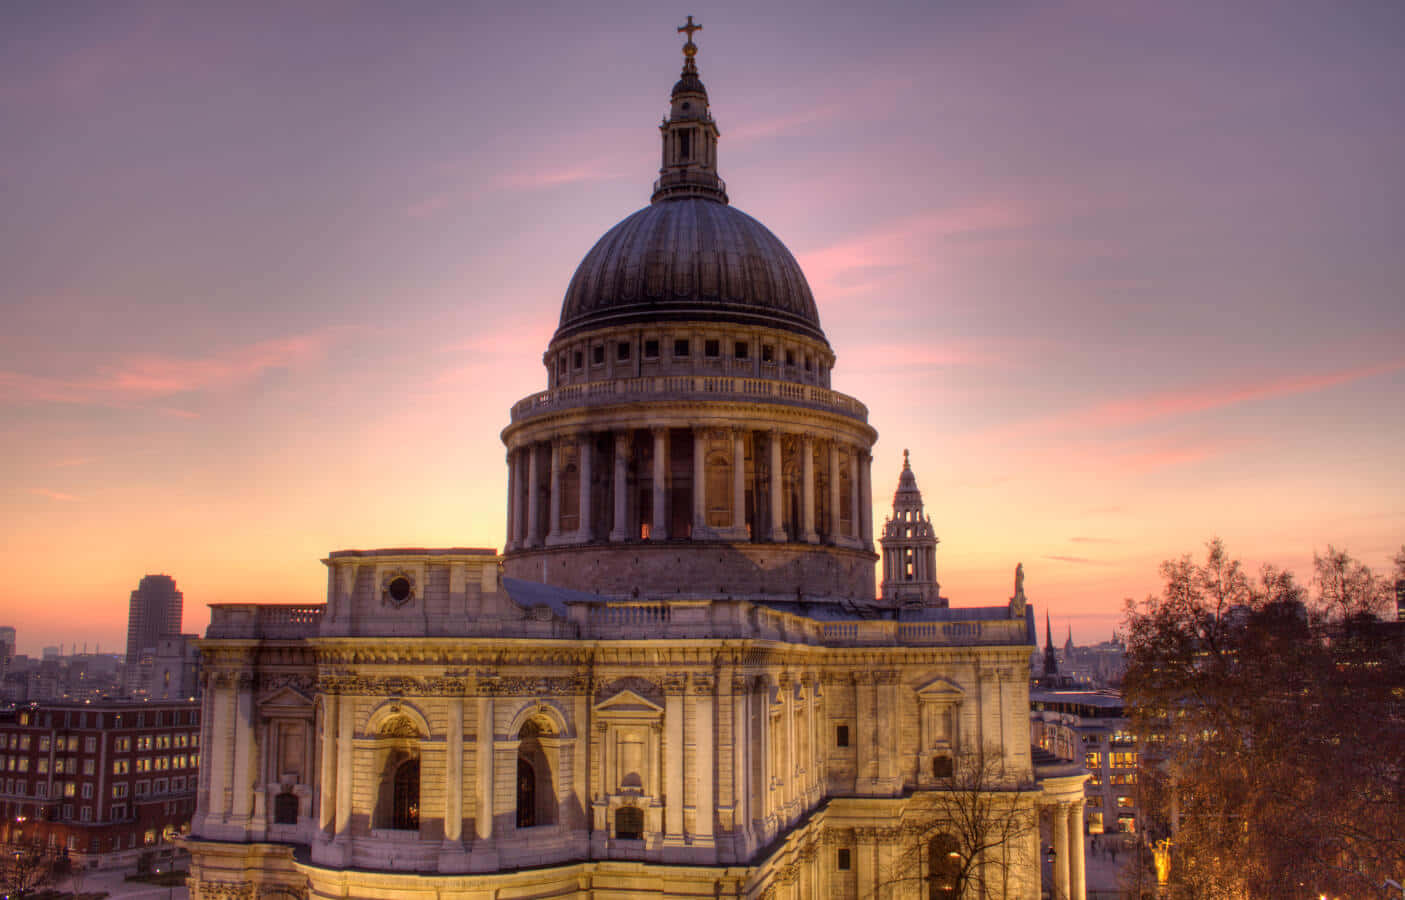 St. Paul's Cathedral 1405 X 900 Wallpaper